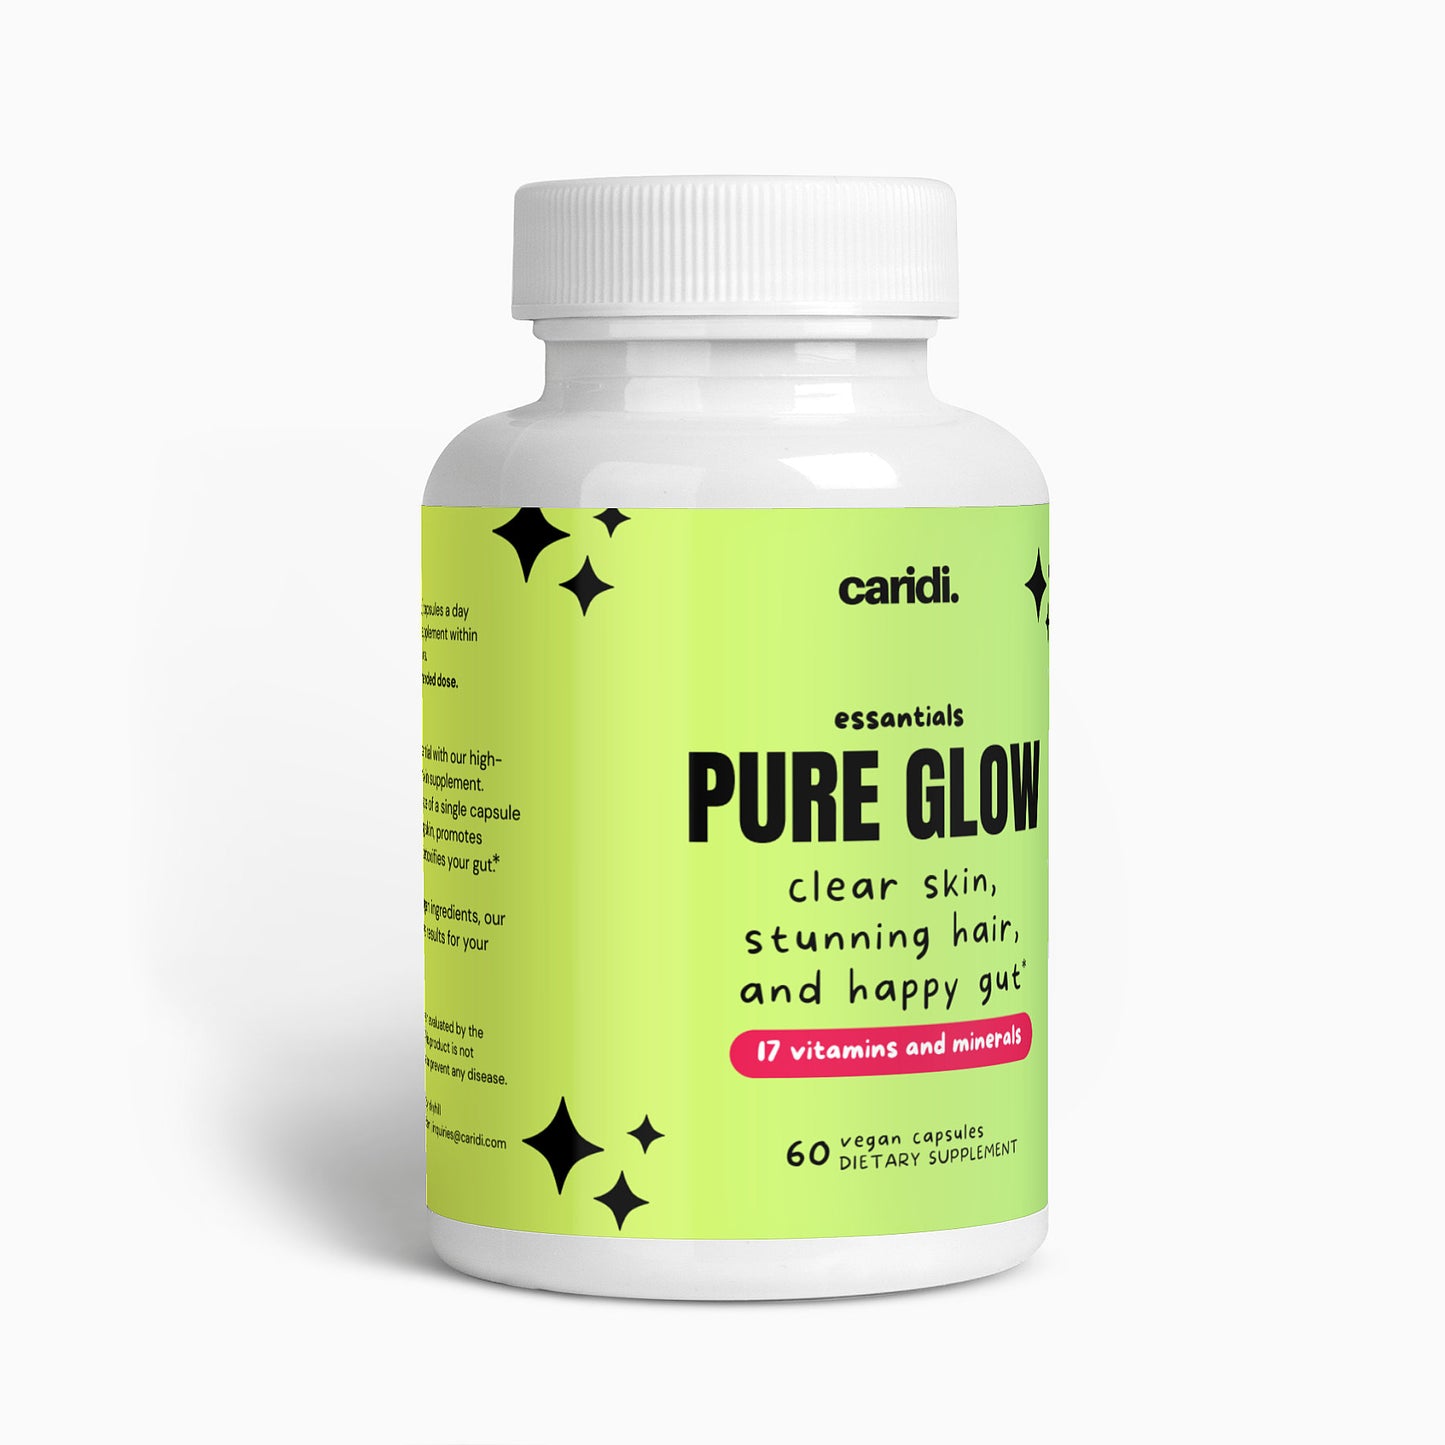 Bottle of pure glow skin supplement capsules for clear, acne-free, and glowing skin.